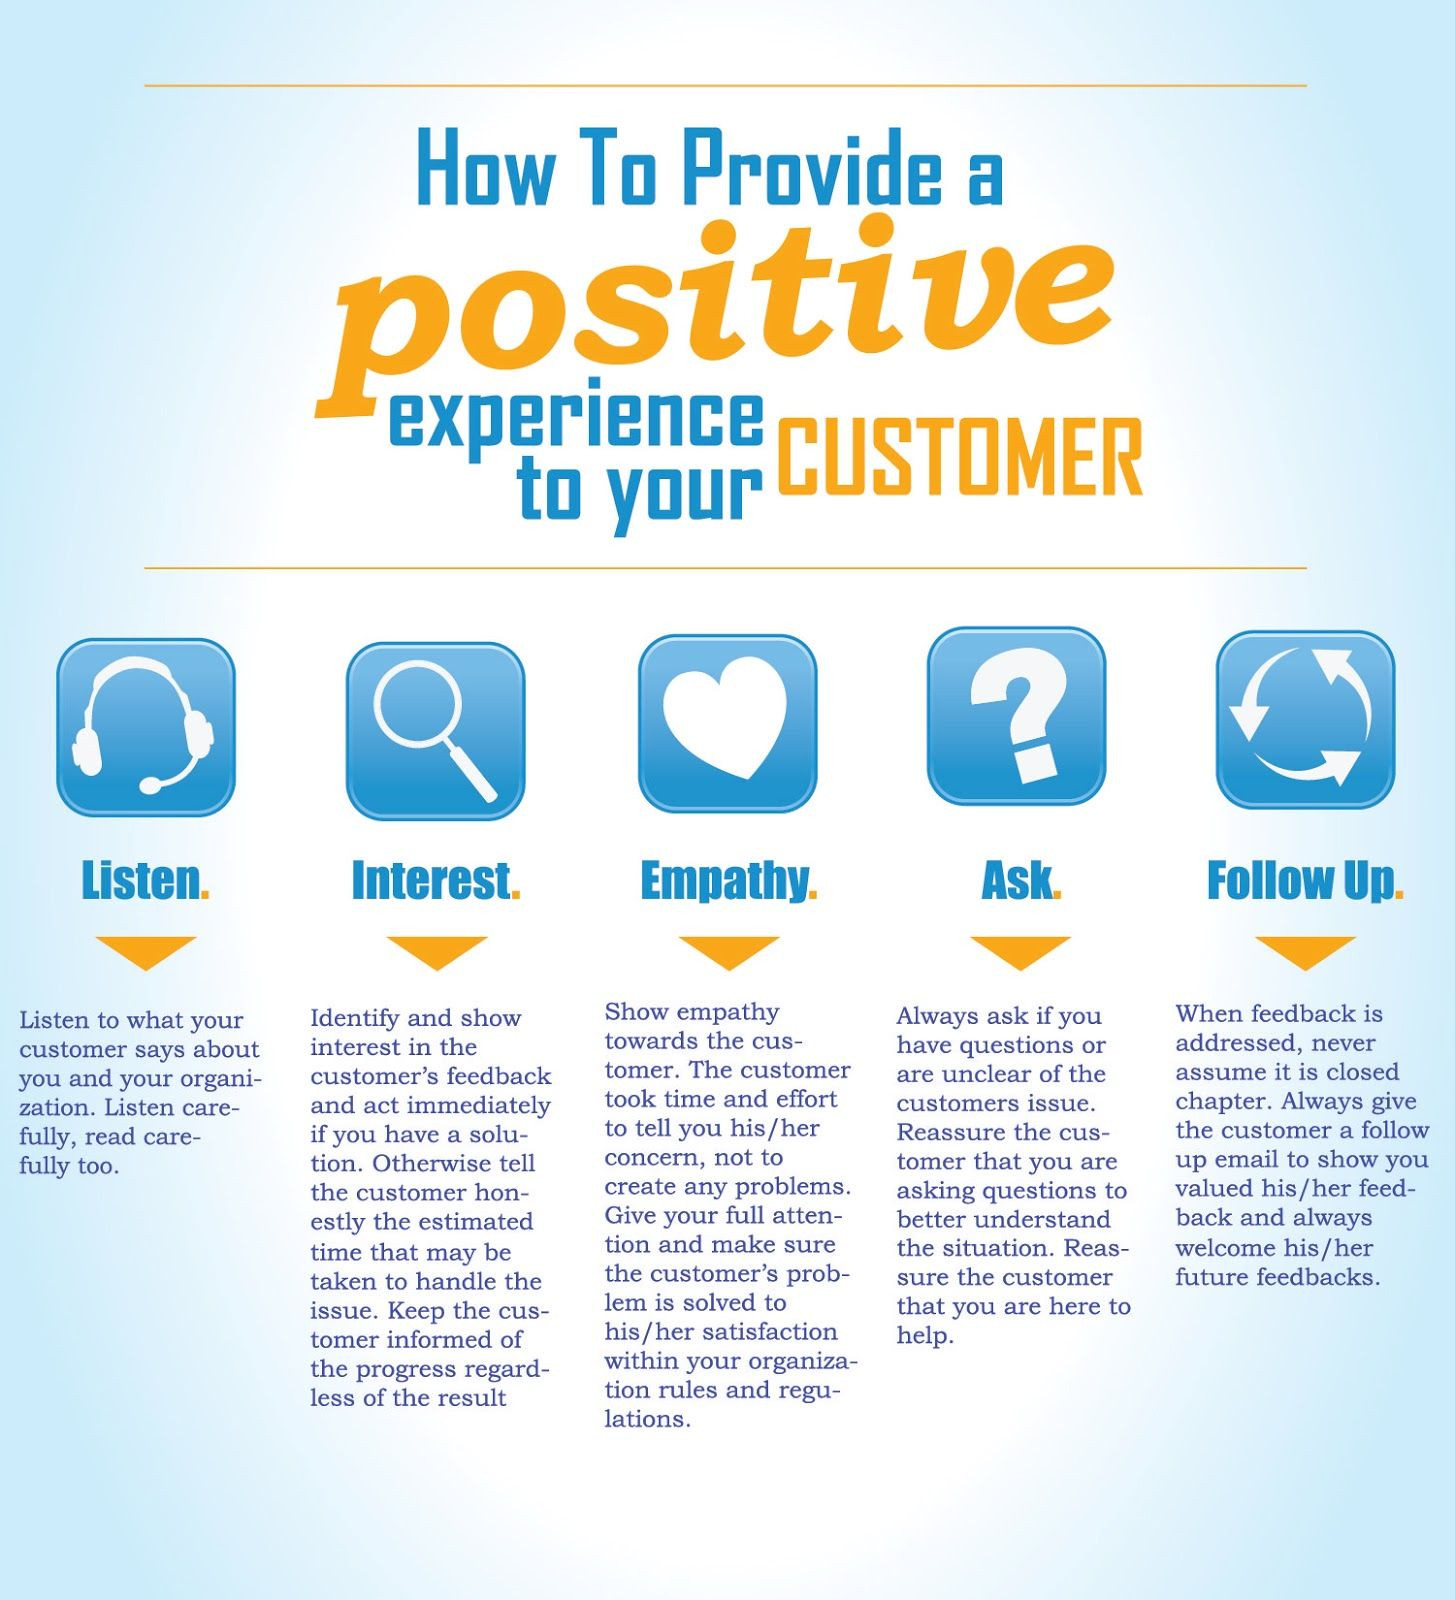 Call Center Motivational Quotes
 How to Provide a Positive Experience to Your Customer